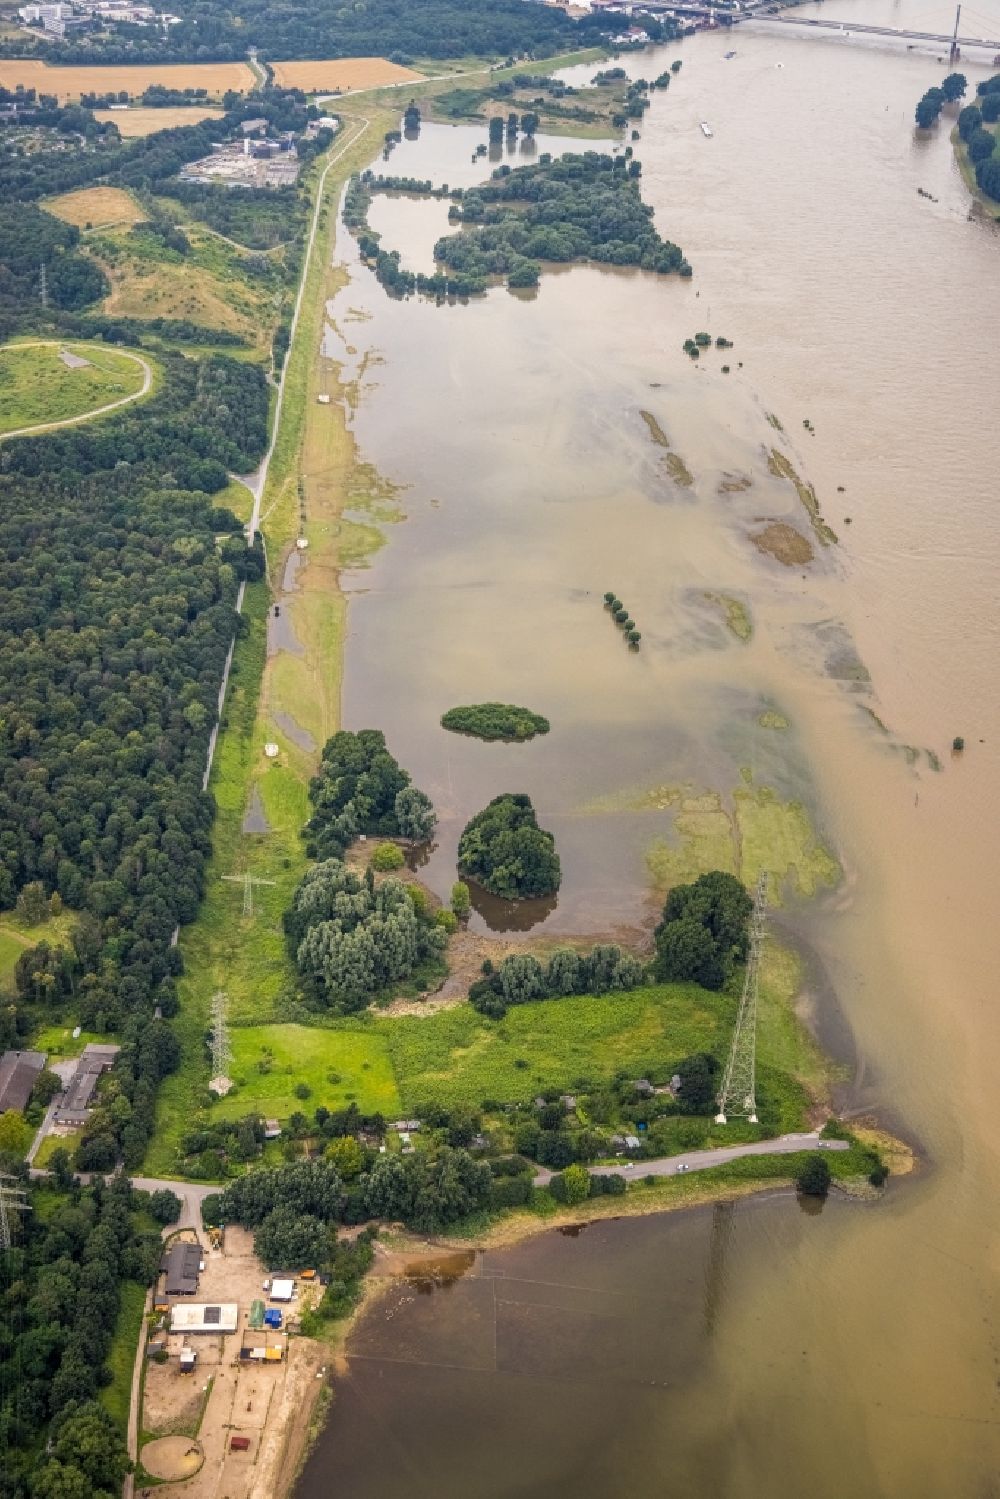 Aerial photograph Duisburg - Shore areas with flooded by flood level riverbed of Rhein on Werthauser Wardt in the district Hochemmerich in Duisburg at Ruhrgebiet in the state North Rhine-Westphalia, Germany